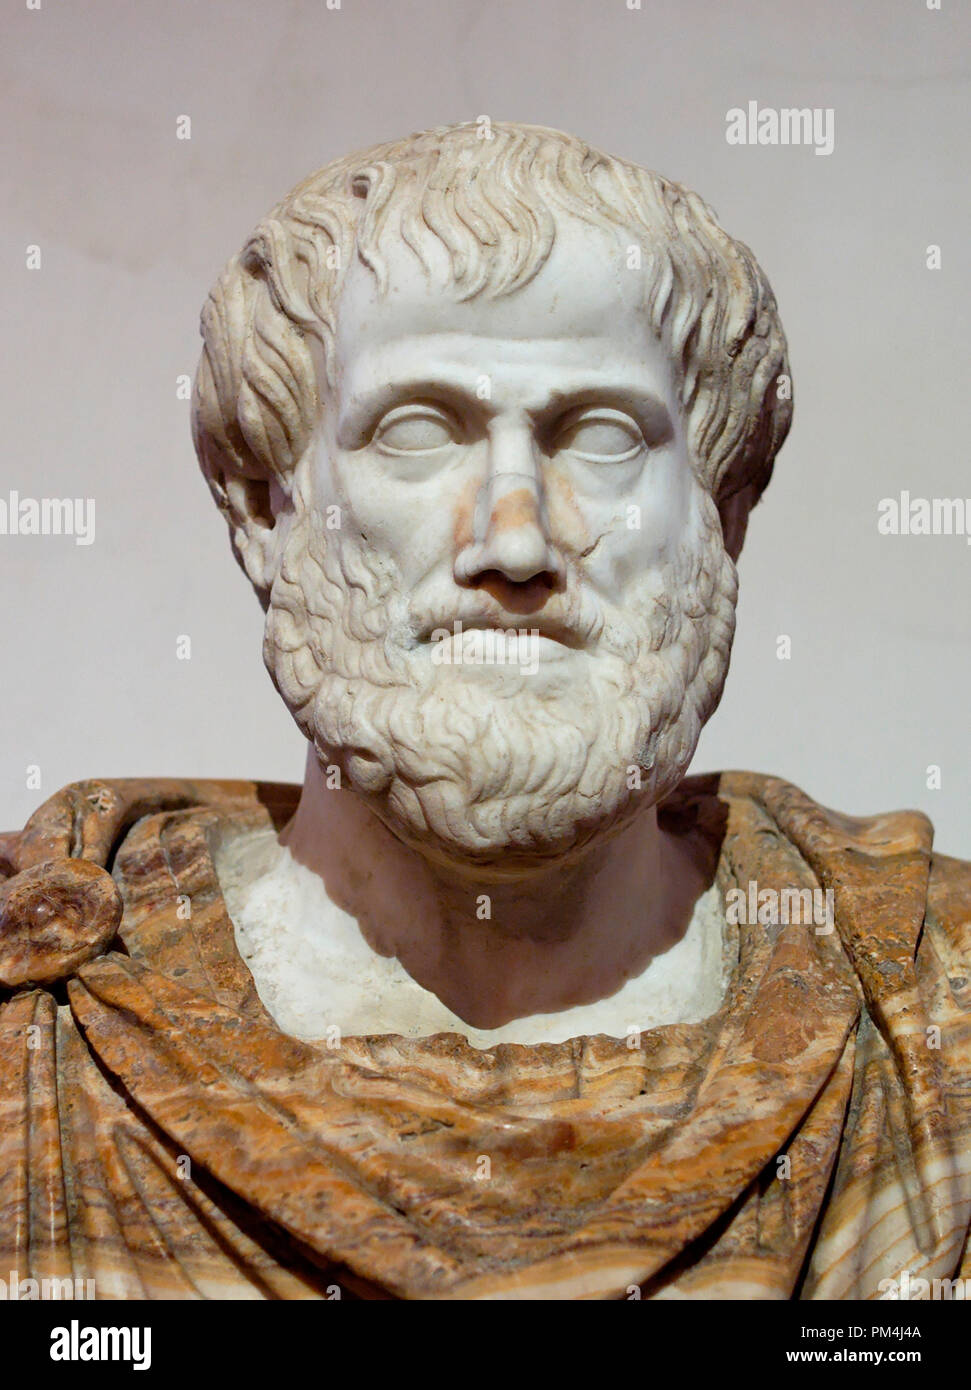 Bust of Aristotle. Marble, Roman copy after a Greek bronze original by Lysippos from 330 BC. Bust is currently at National Roman Museum, Rome Italy   File Reference # 1003 515THA Stock Photo